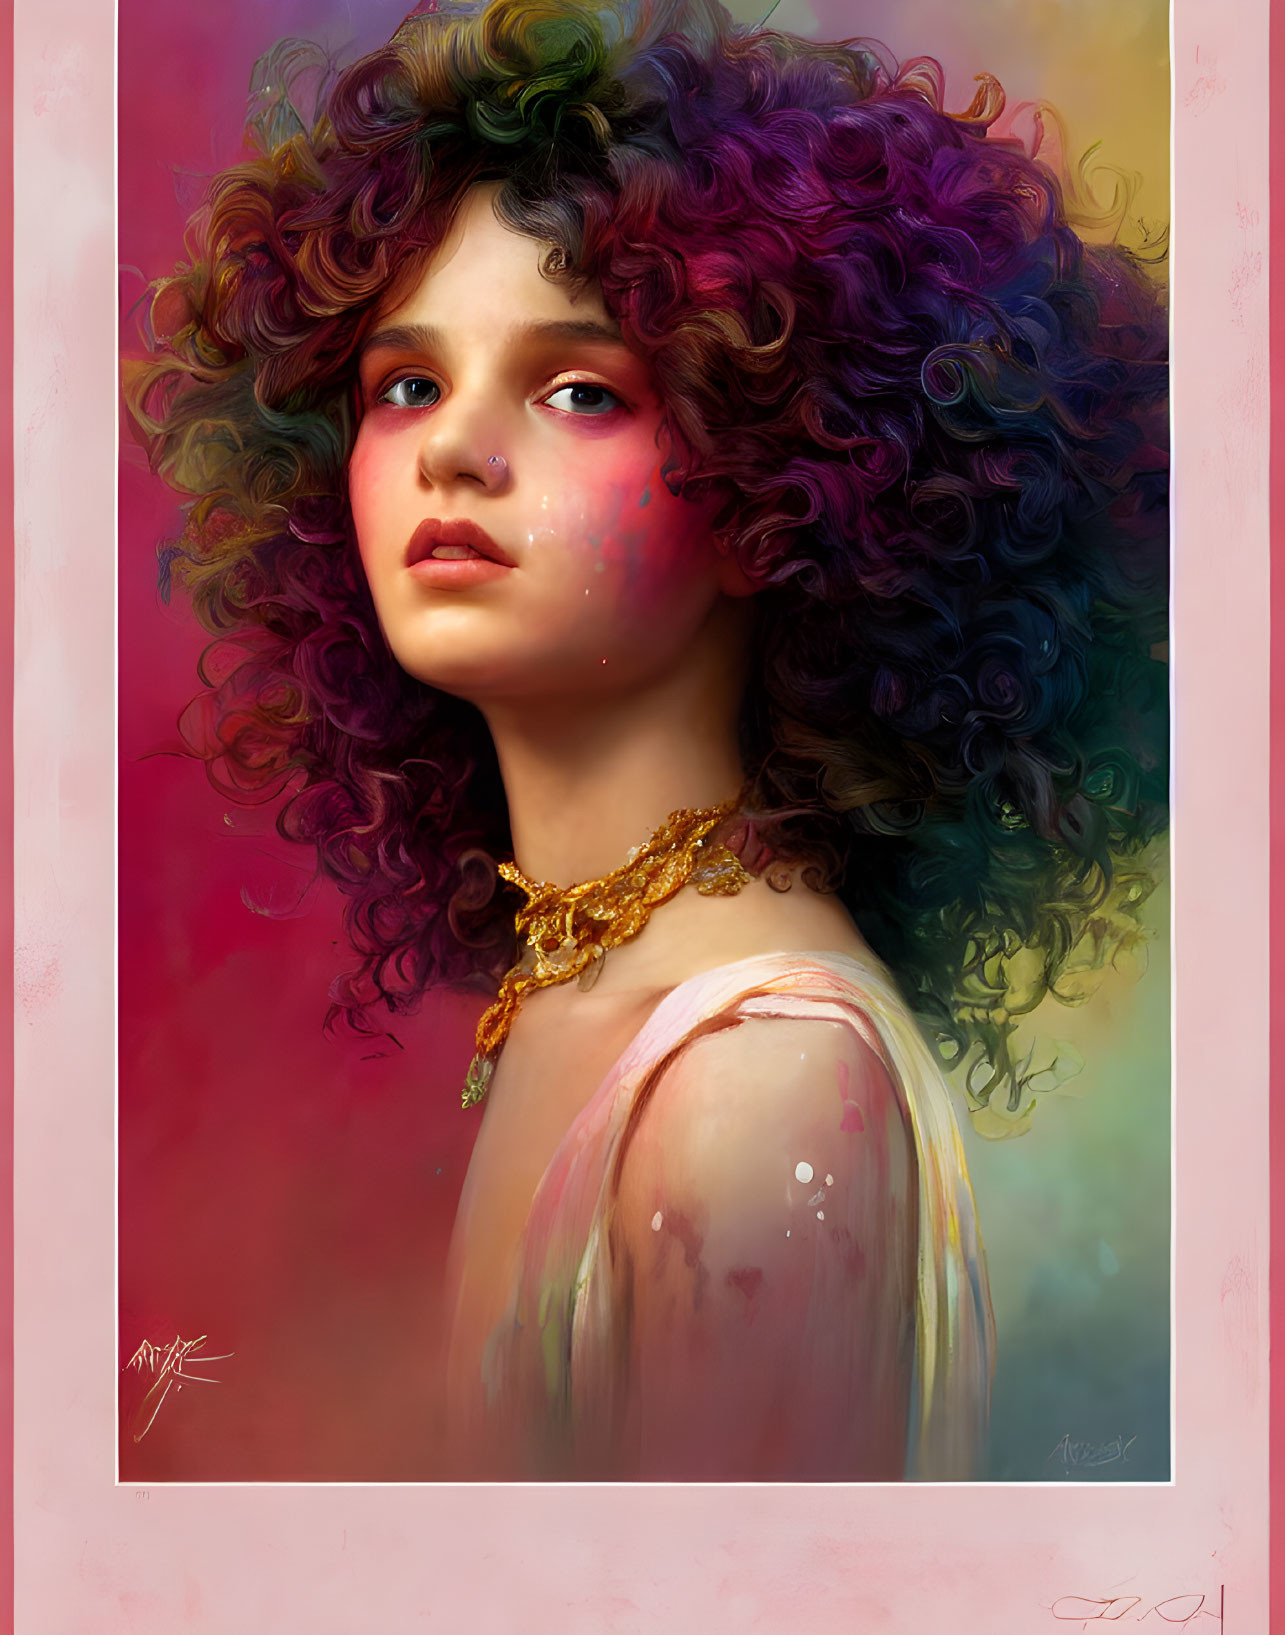 Colorful portrait of a person with curly, multi-colored hair and golden necklace against warm gradient.